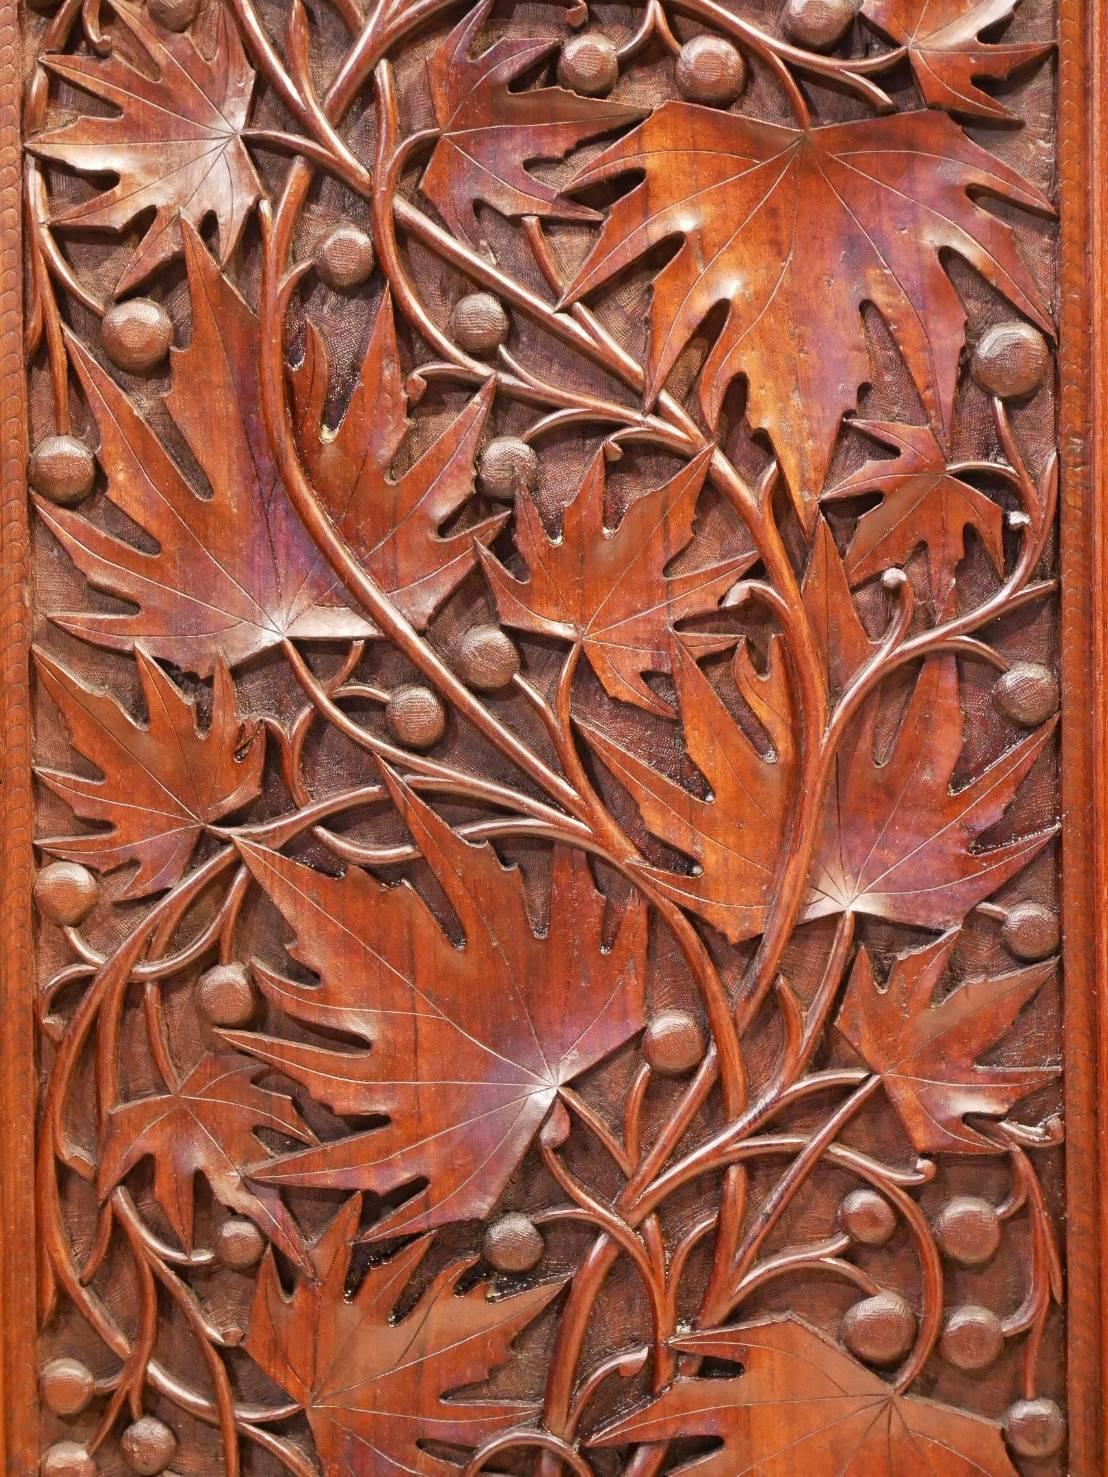 Original Art Nouveau period French paravan, room divider. Four leaves massive exotic wood panels hand carved with floral motives, iris flowers, lotus flowers, water reed, and maple tree.
The screen is carved on both sides with the same pattern.